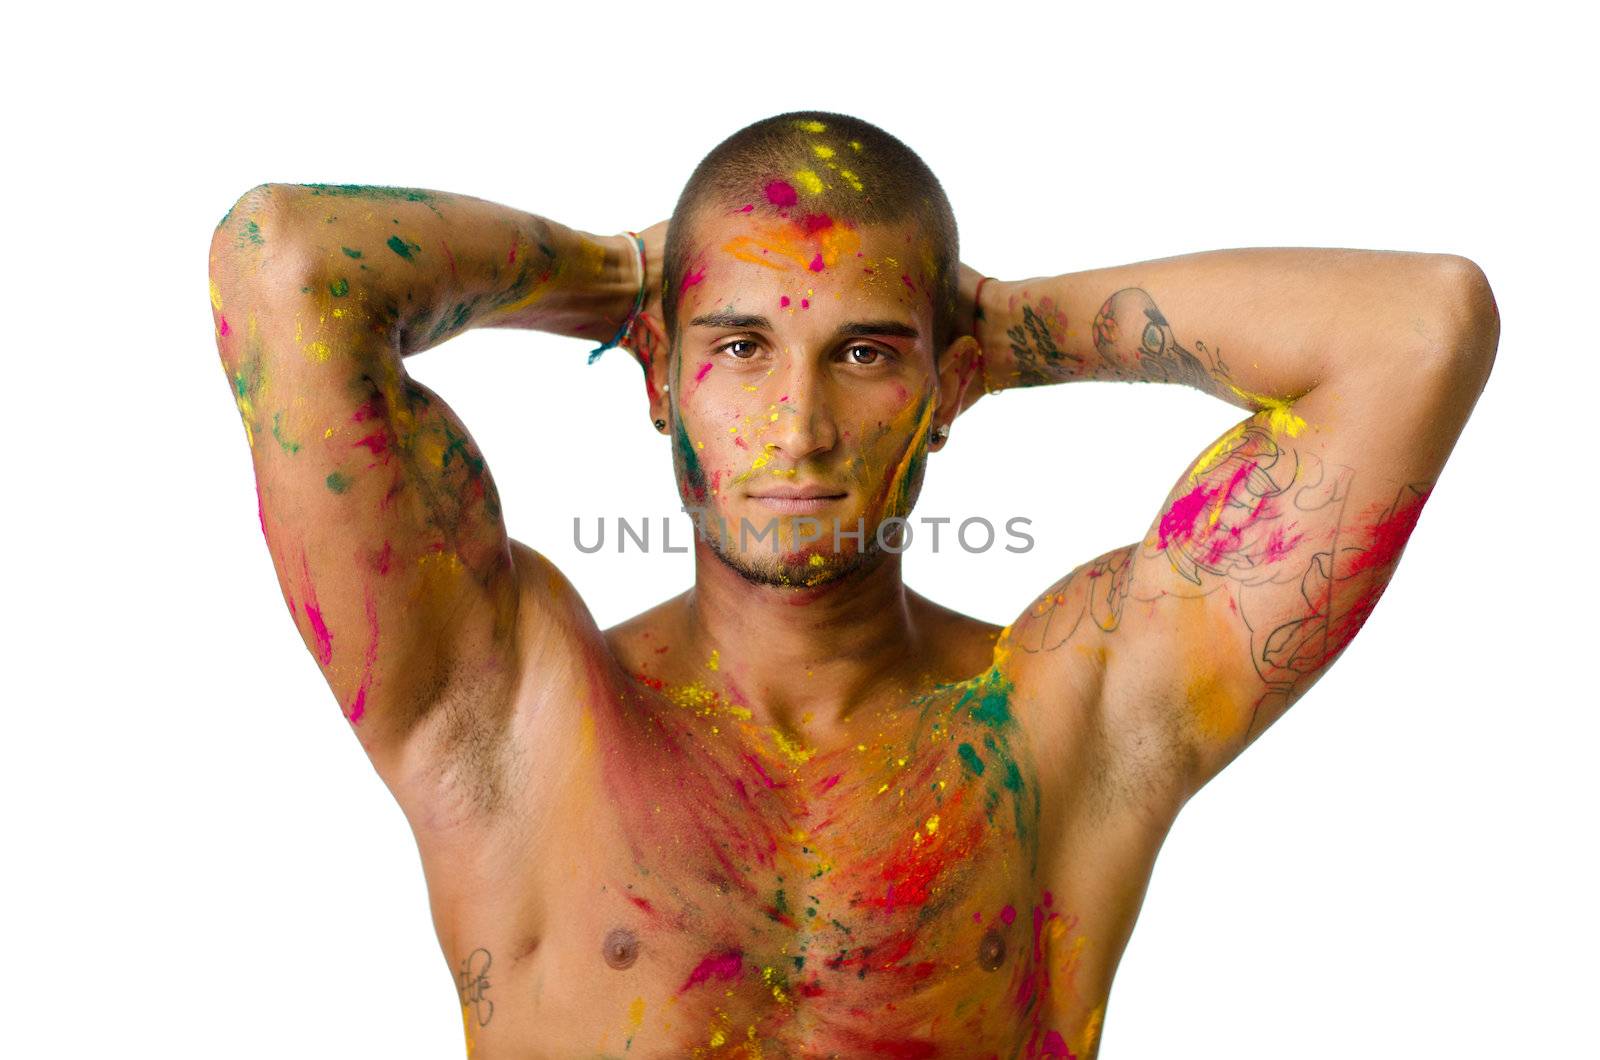 Handsome young man with skin all painted with colors, arms up and hands behind his head, isolated on white